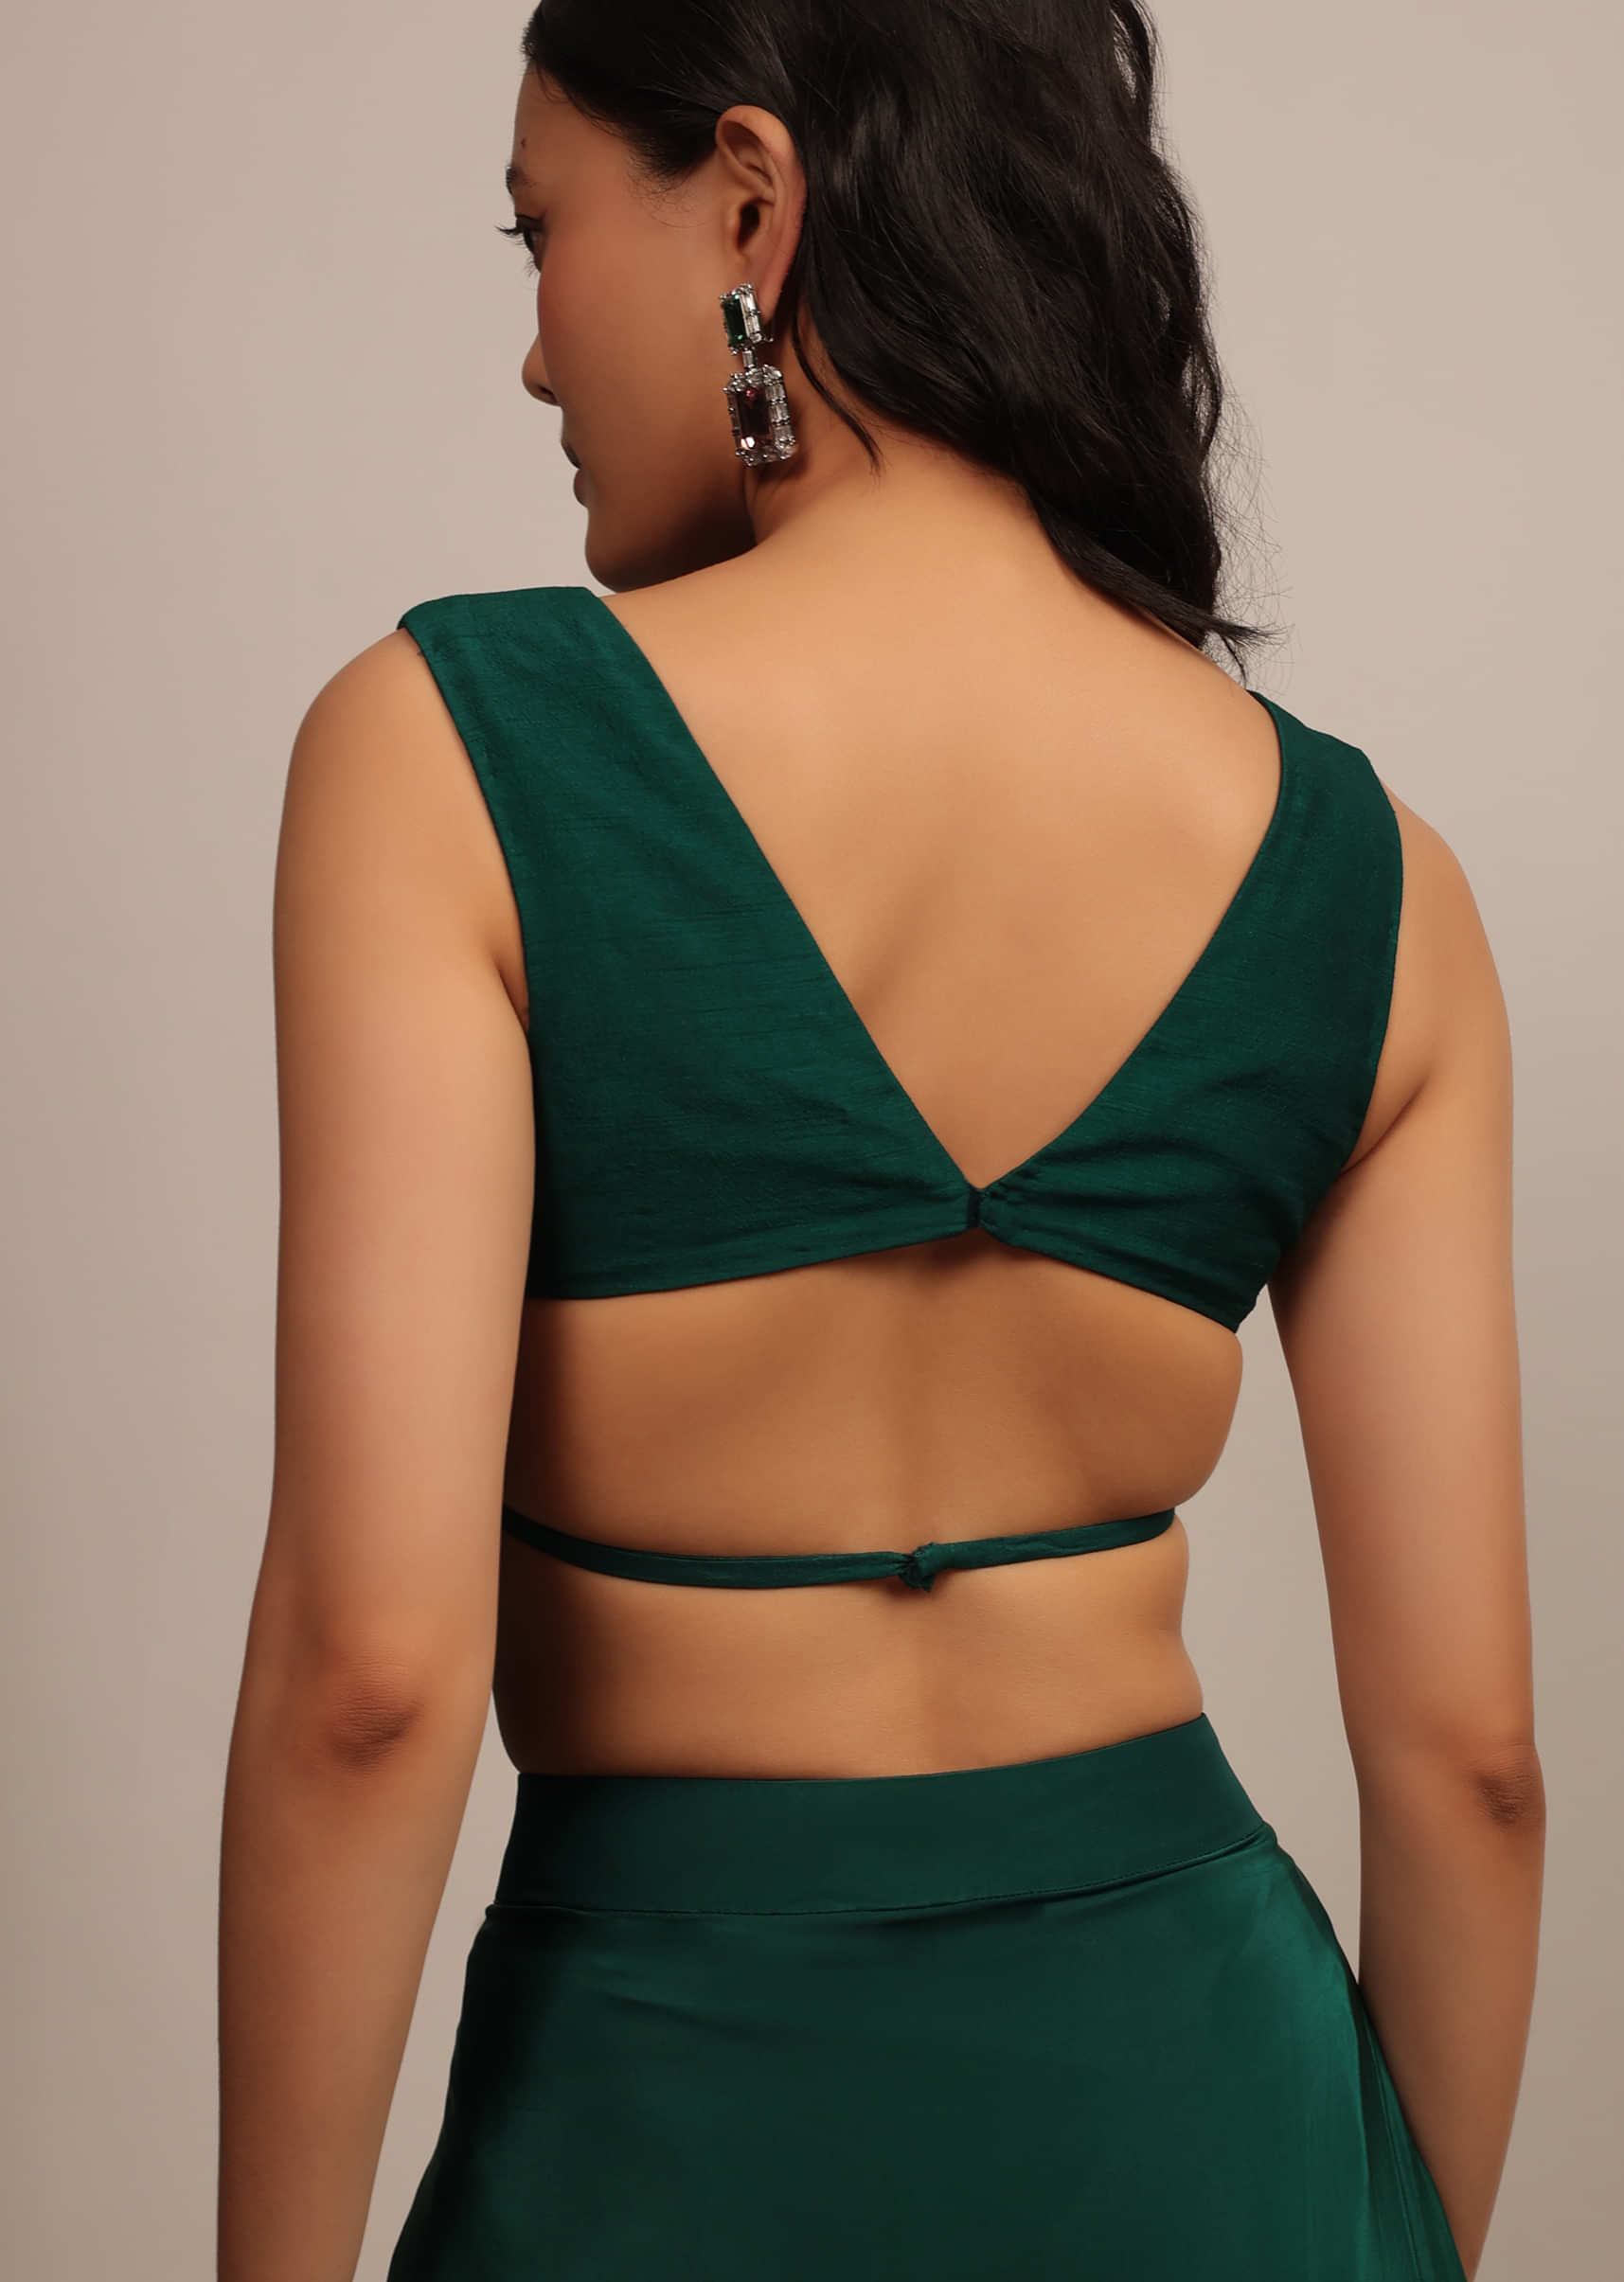 Emerald Green Sleeveless Blouse In Raw Silk With Strappy Back Hook 